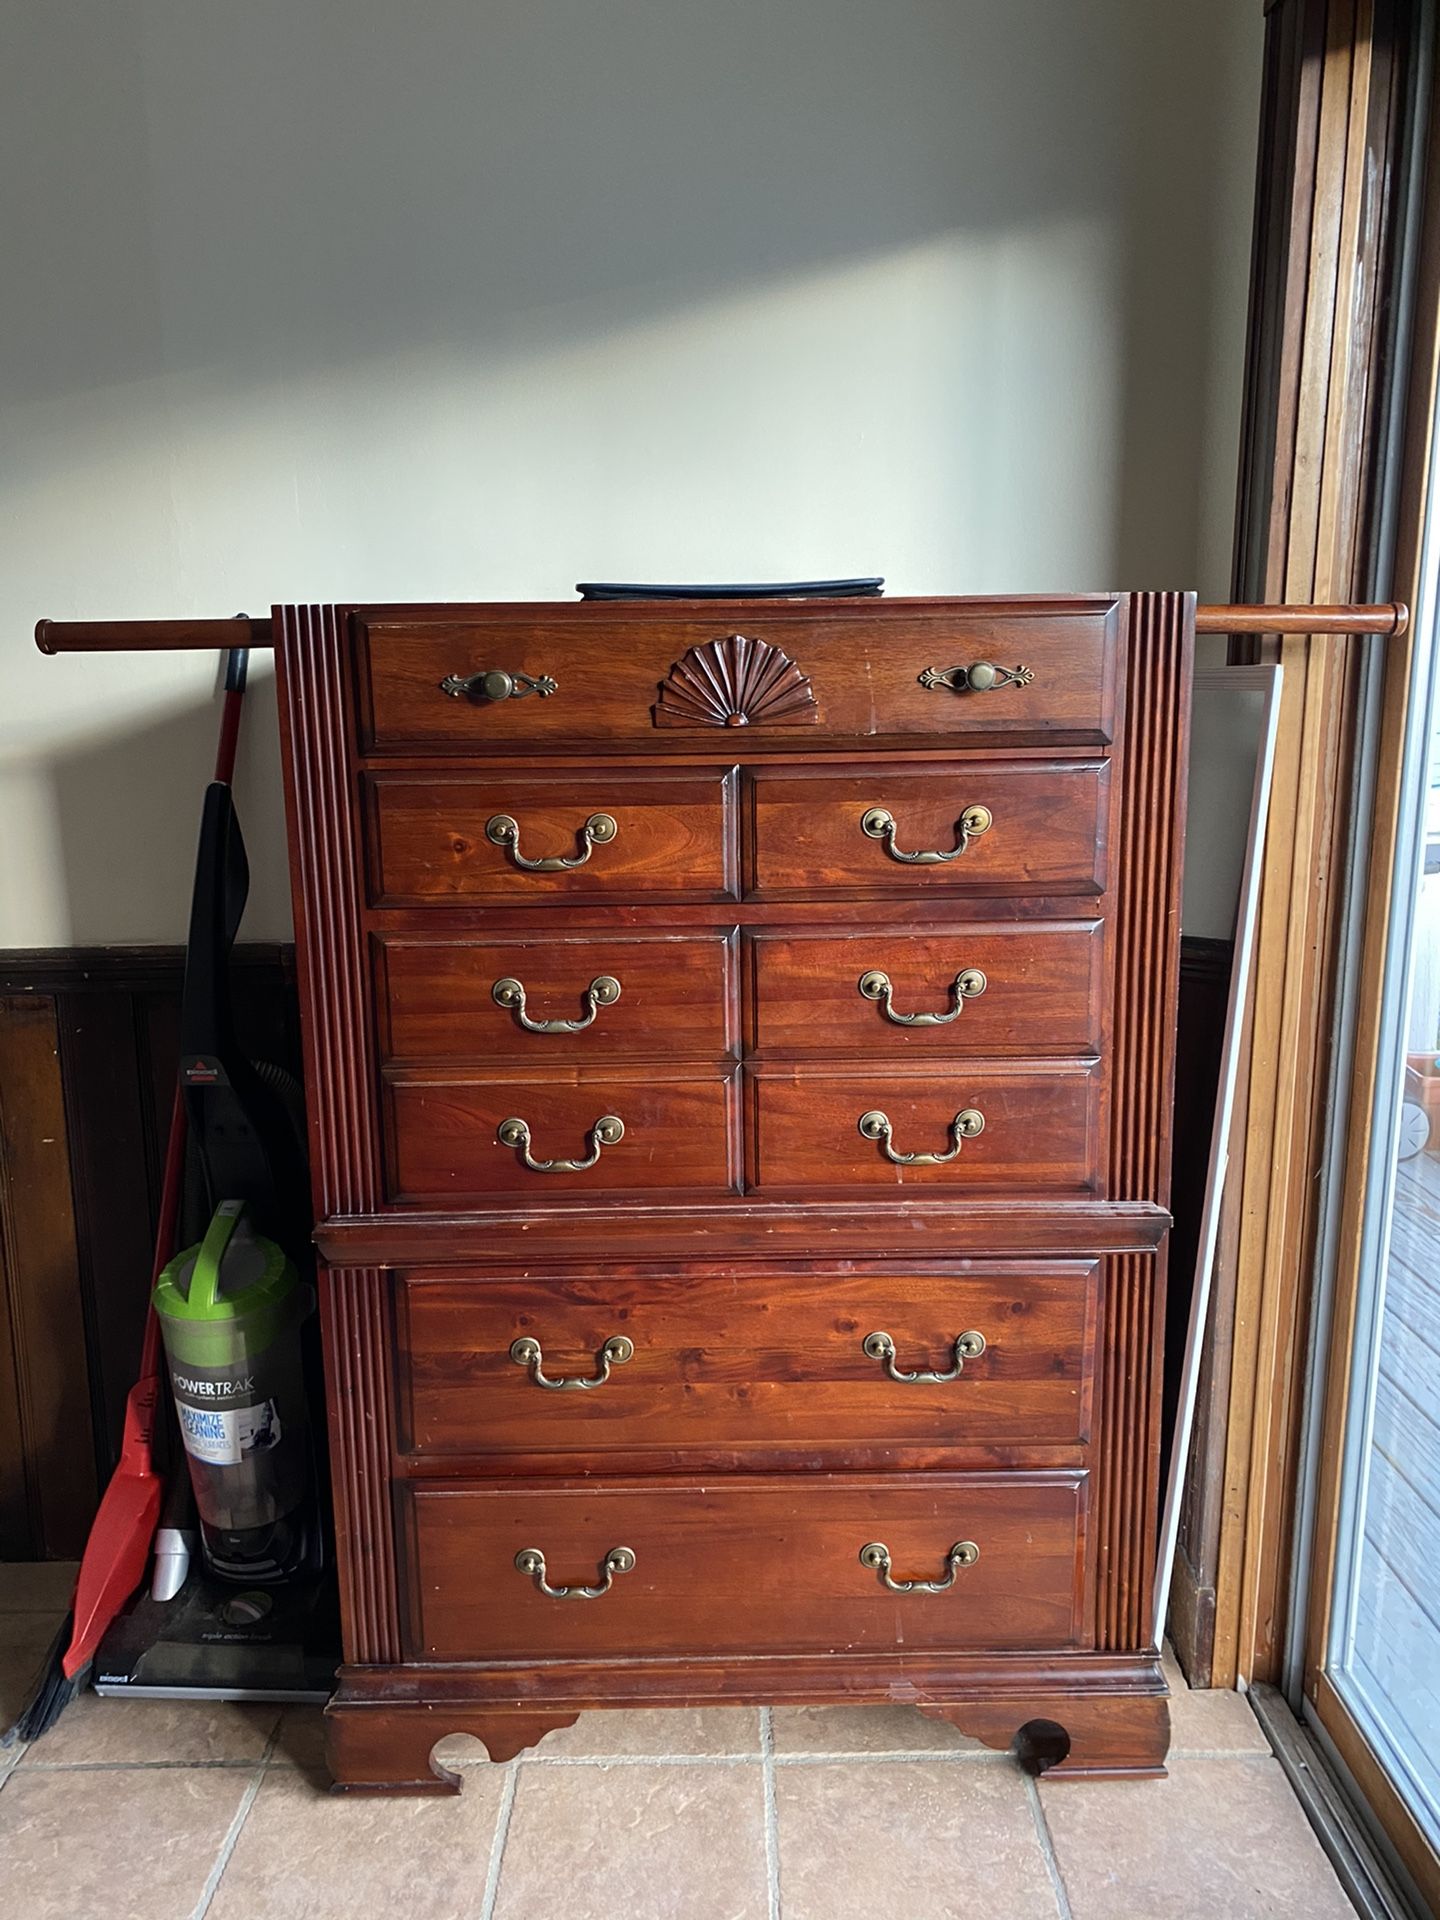 Full Wood Dresser with arms